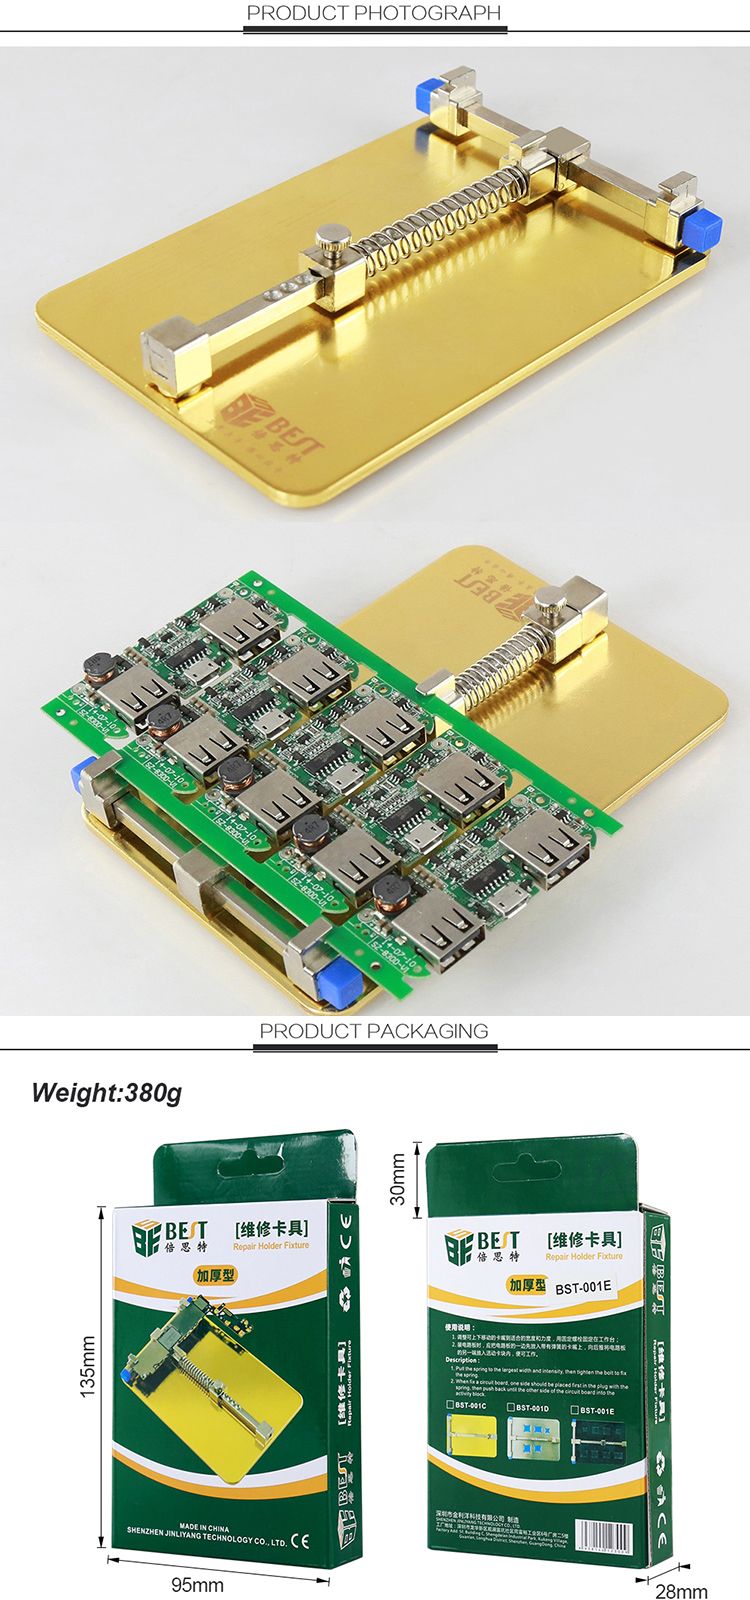 BEST-BST-001C-Mobile-Phone-Board-Repair-PCB-Fixture-Holder-Work-Station-Platform-Fixed-Support-Clamp-1350446